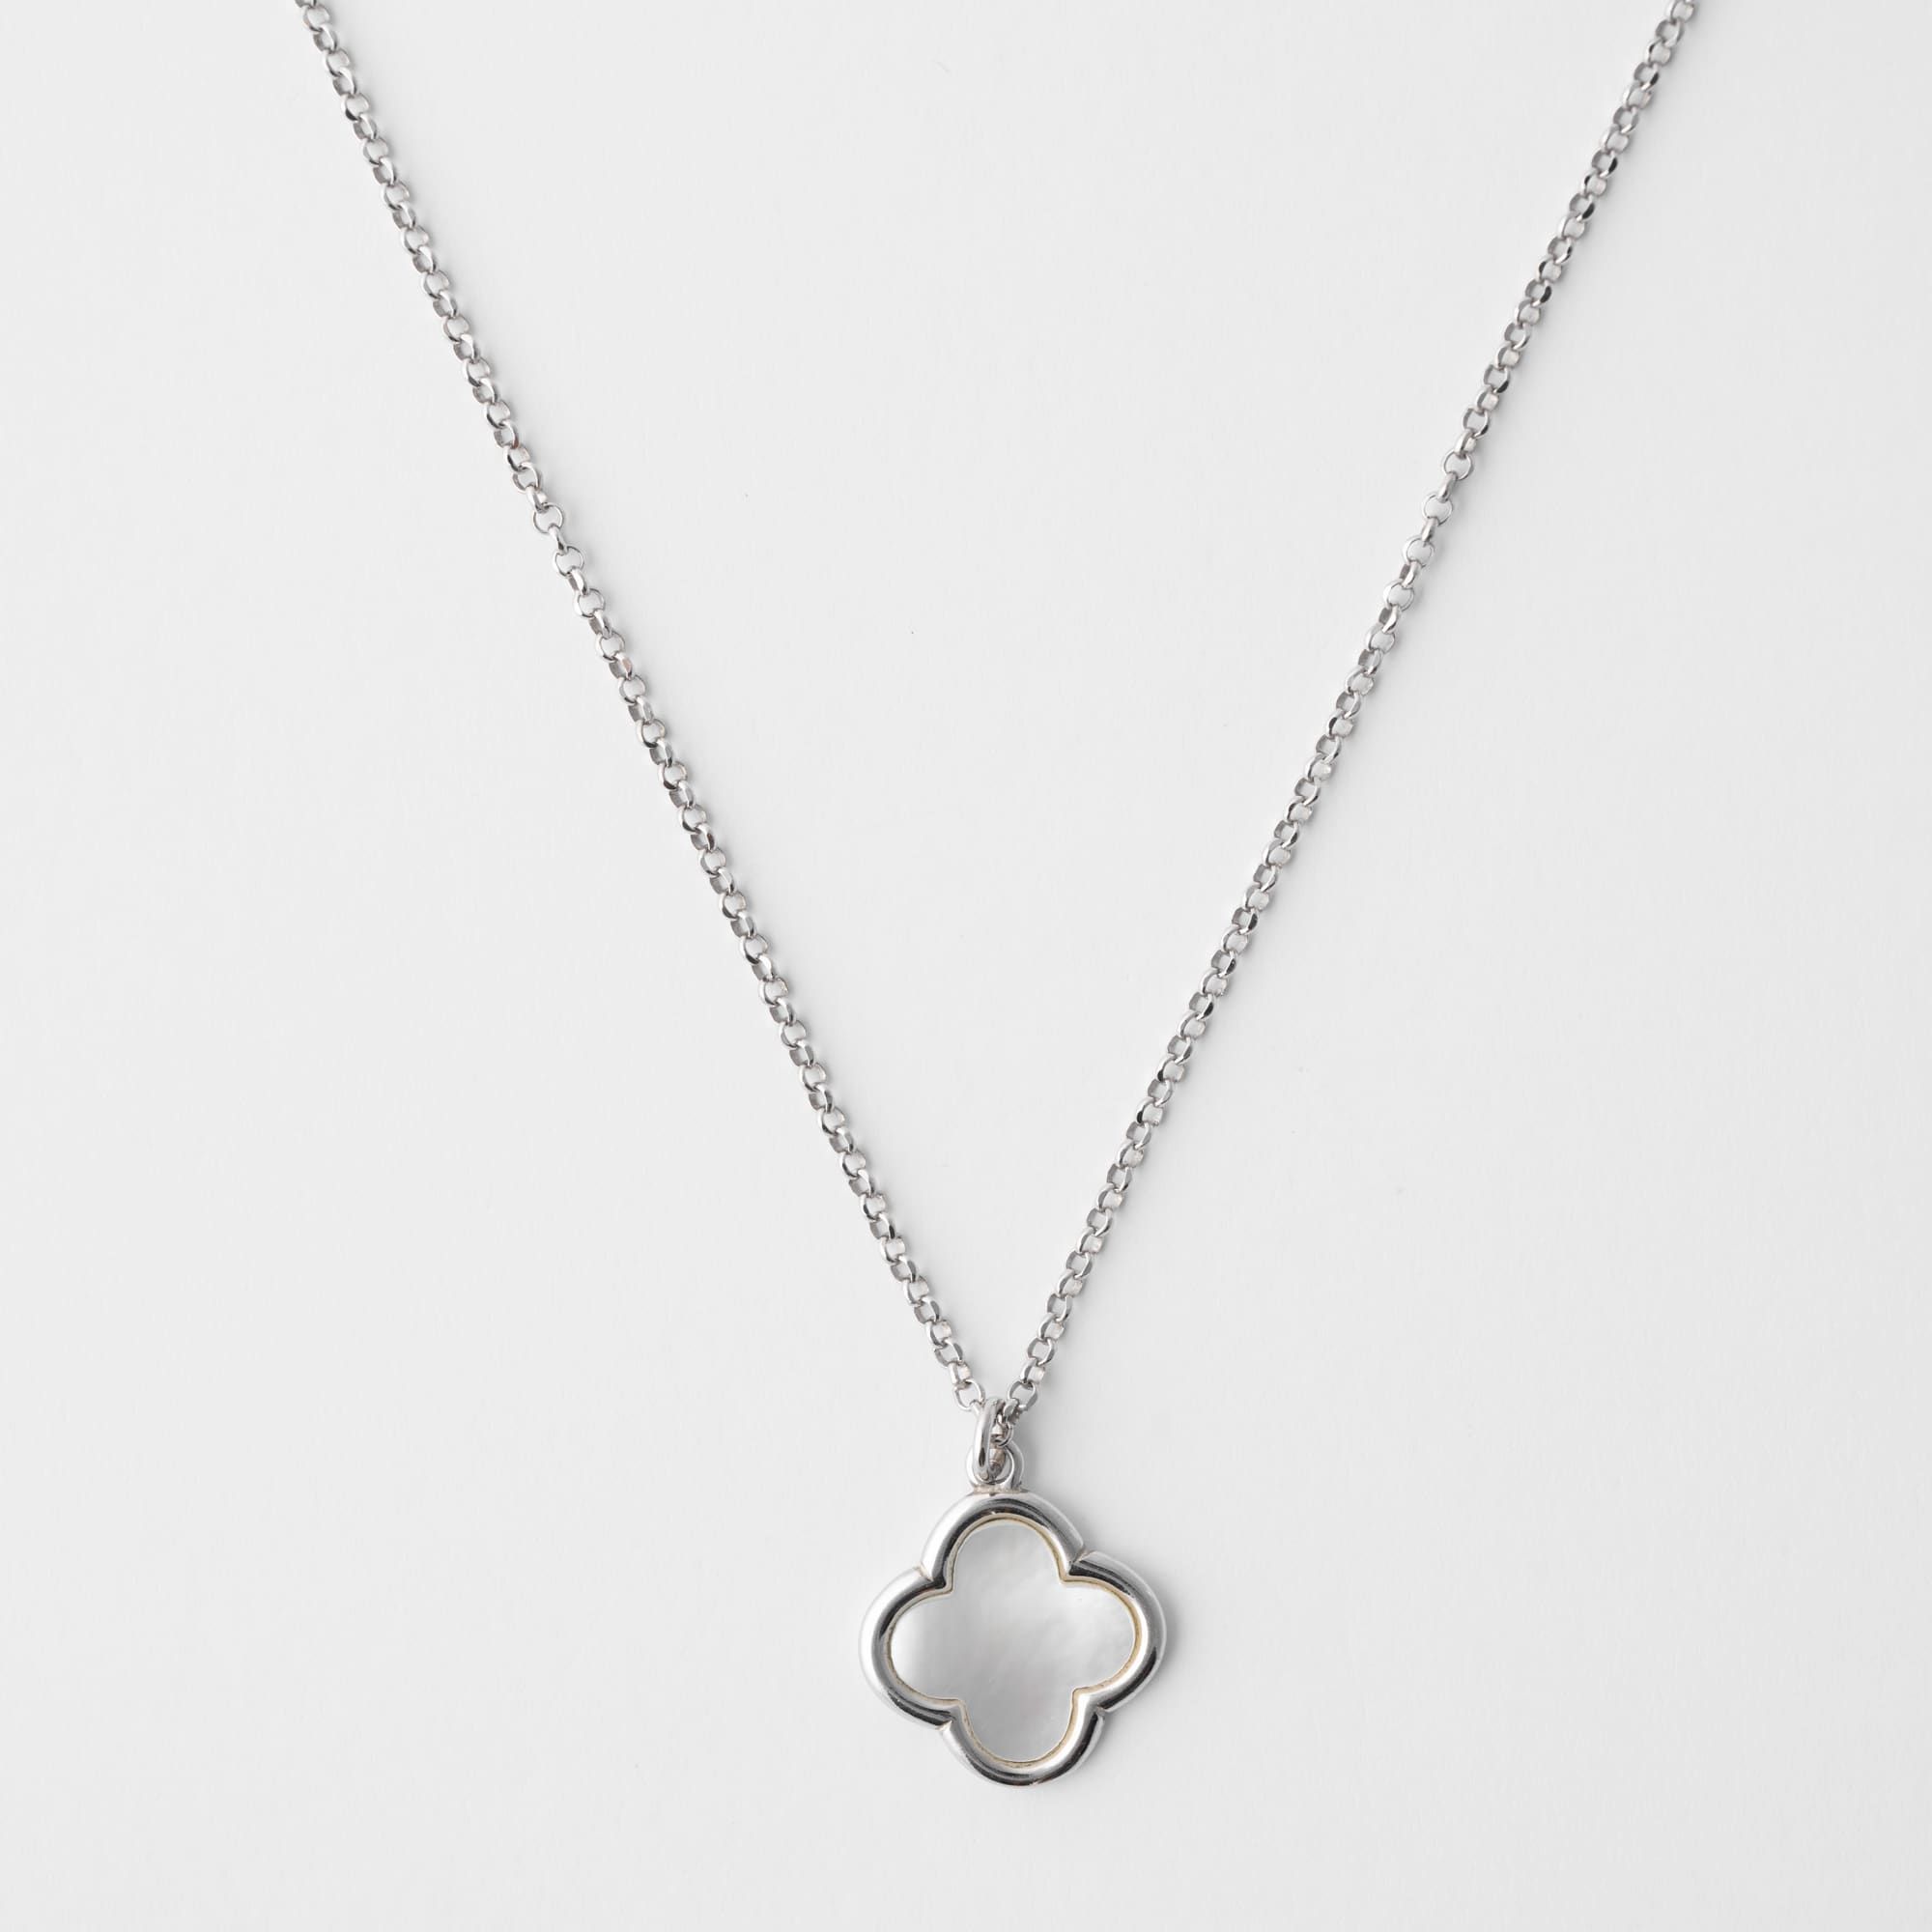 CLOVERLEAF Gold Necklace with Mother of Pearl